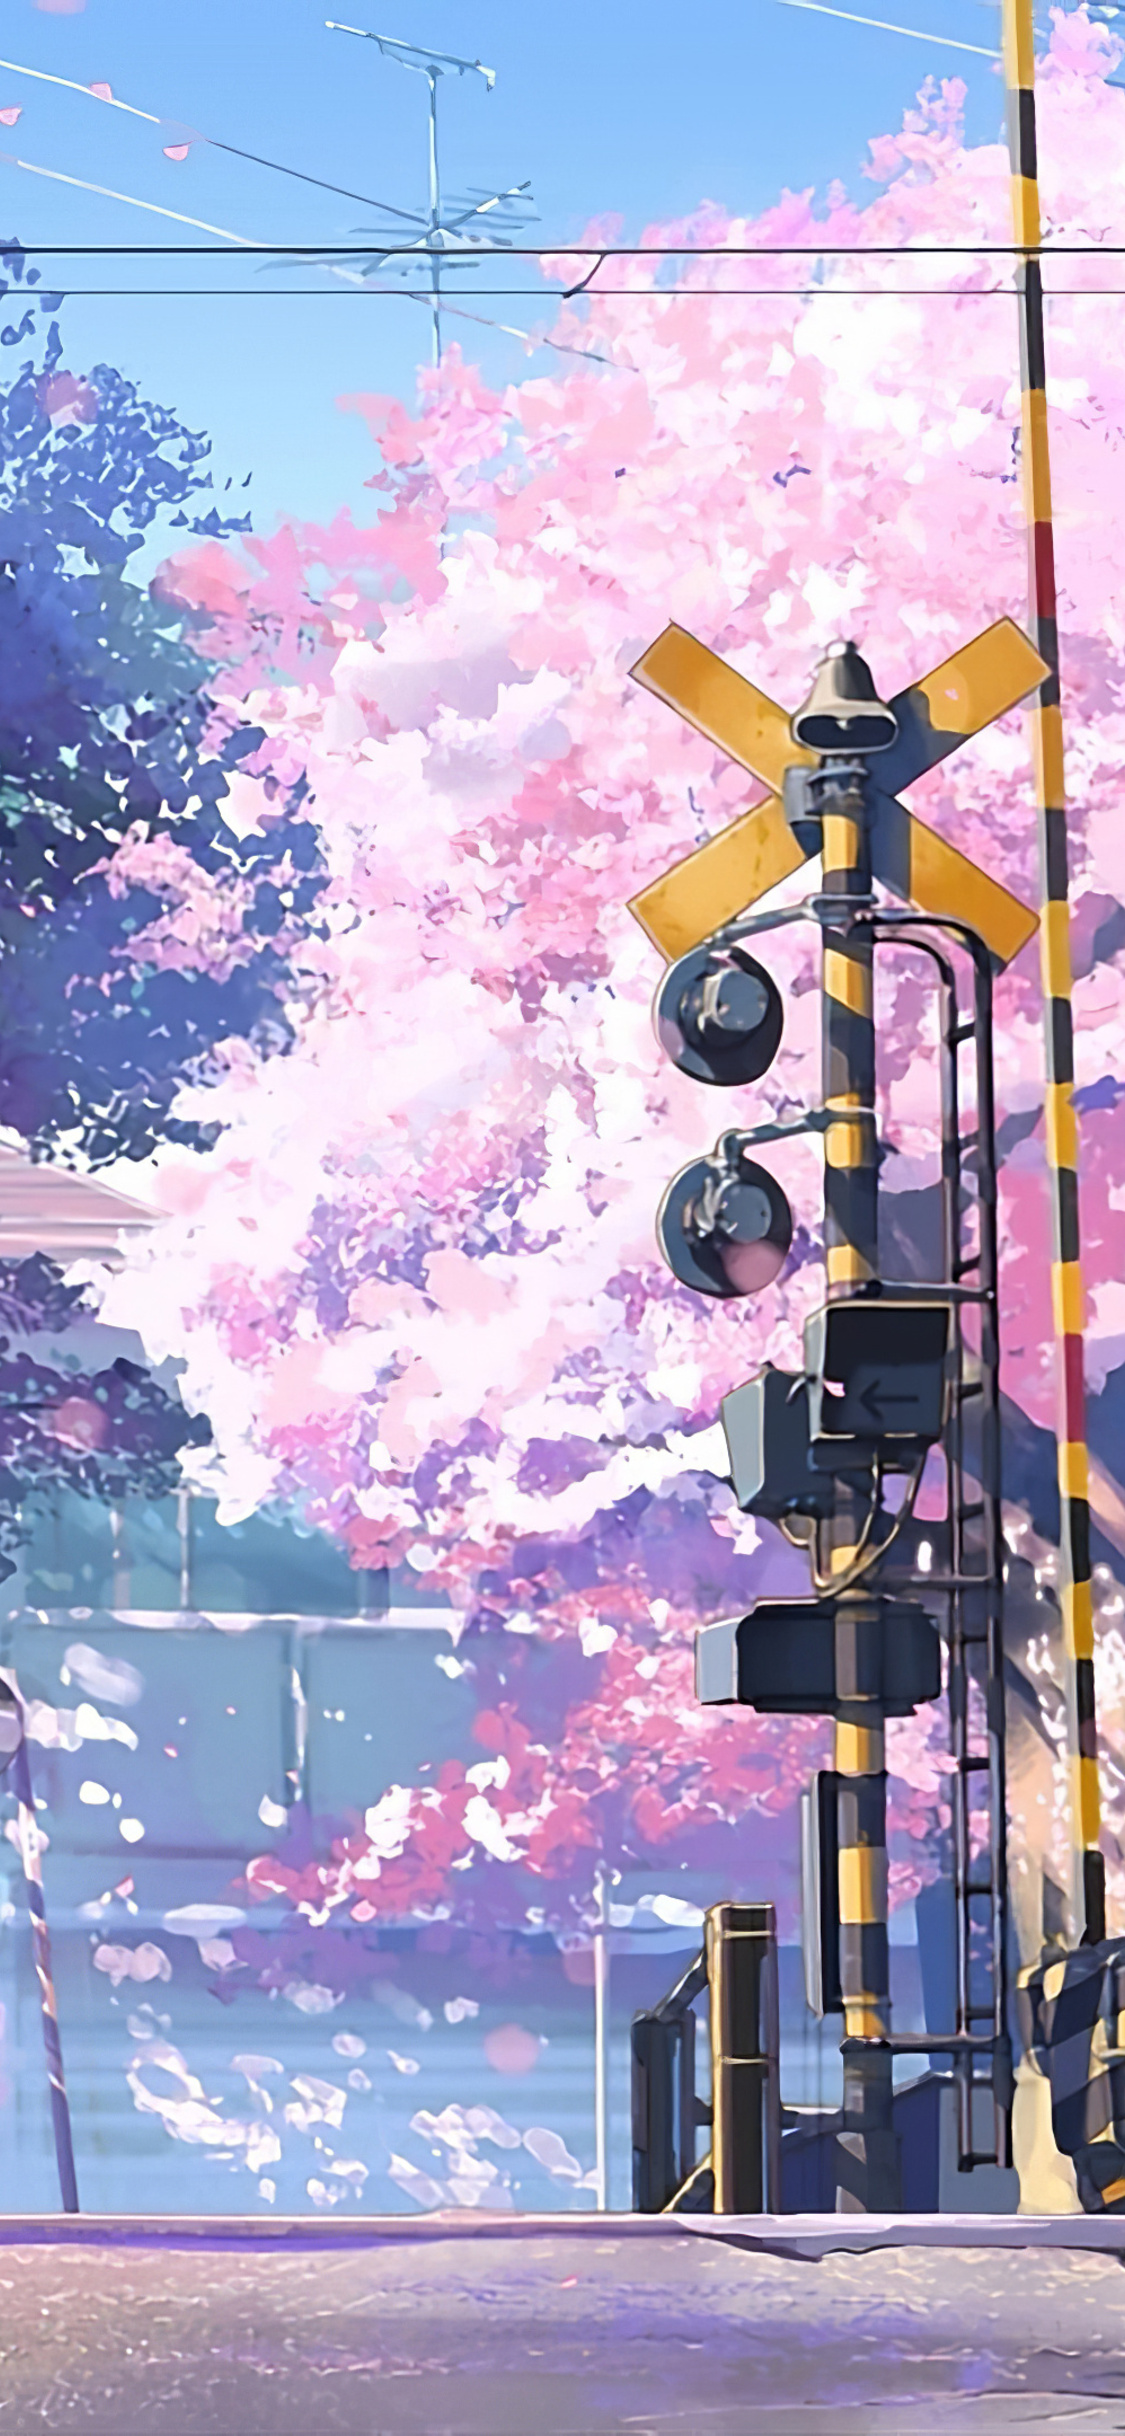 5 centimeters per second | Anime qoutes, Anime quotes, Anime movies